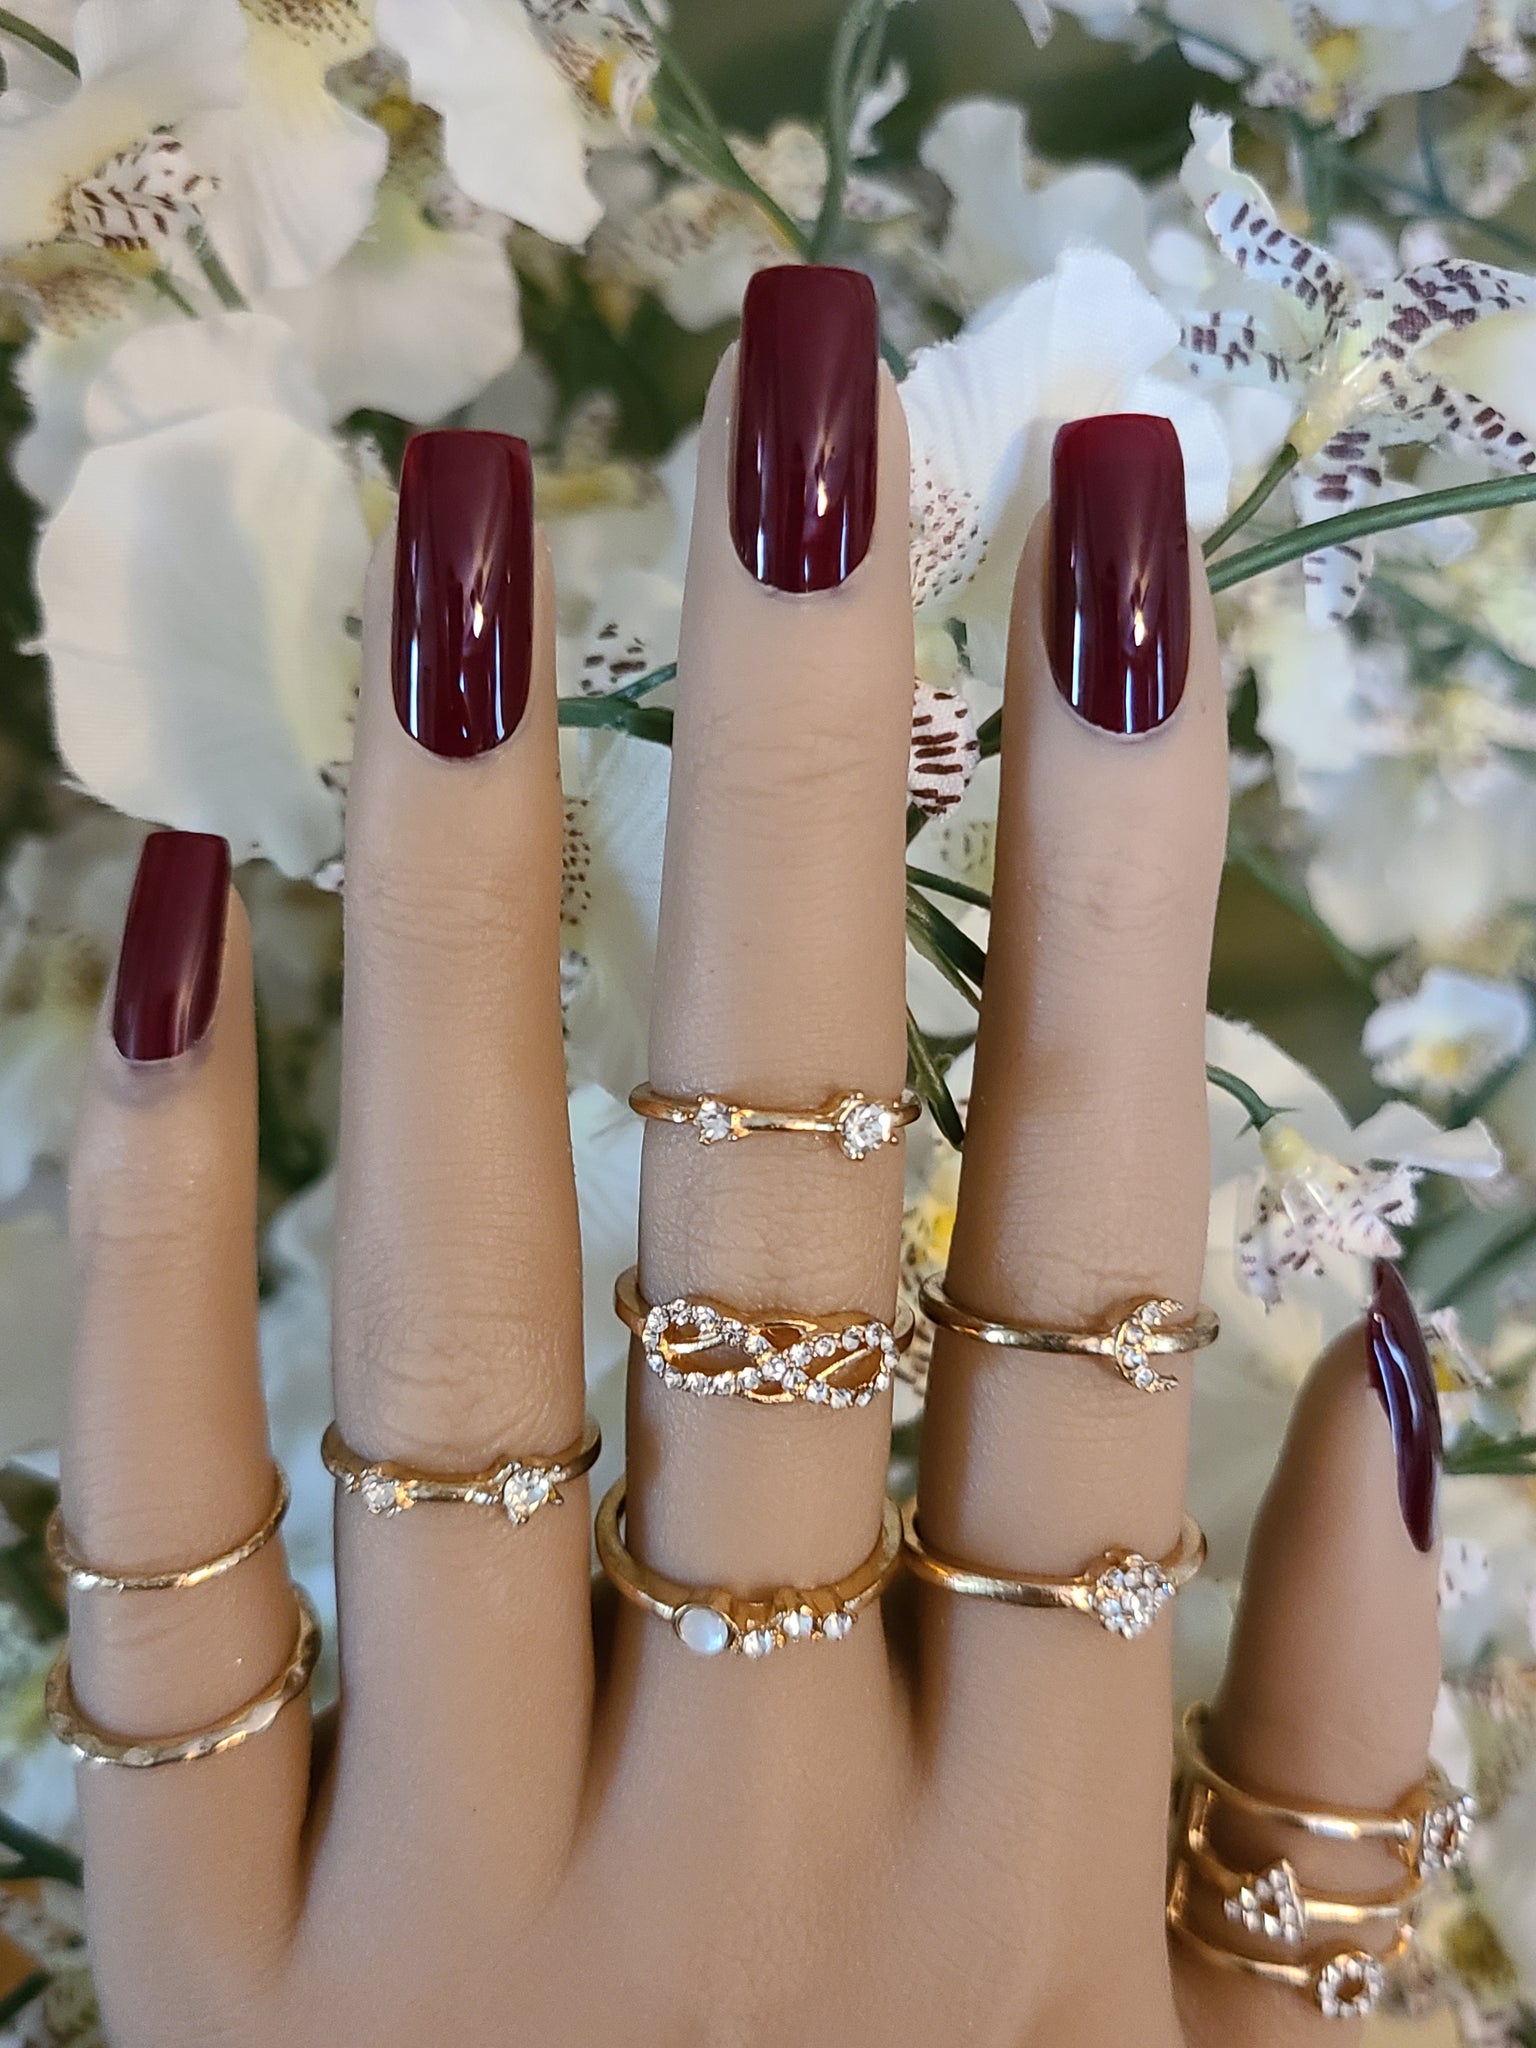 Our Top Nail Polish Colors To Wear This Fall – 100% PURE